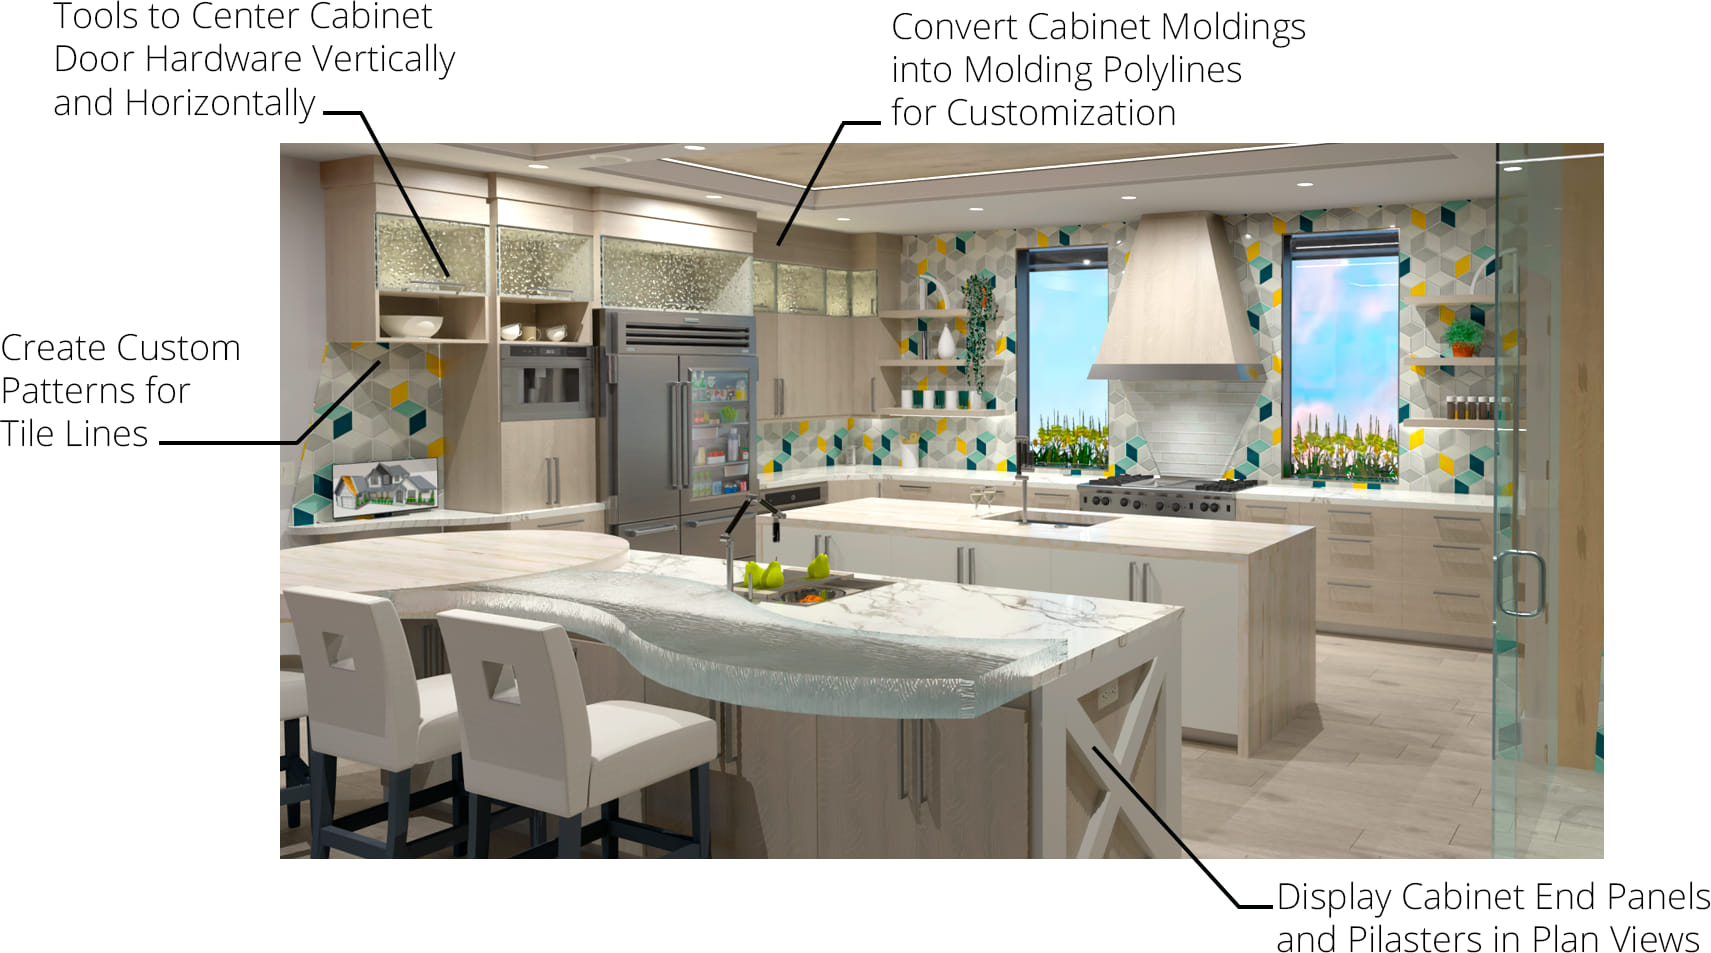 Contemporary kitchen render with dual islands and bright backsplash listing new Chief Architect X15 features.